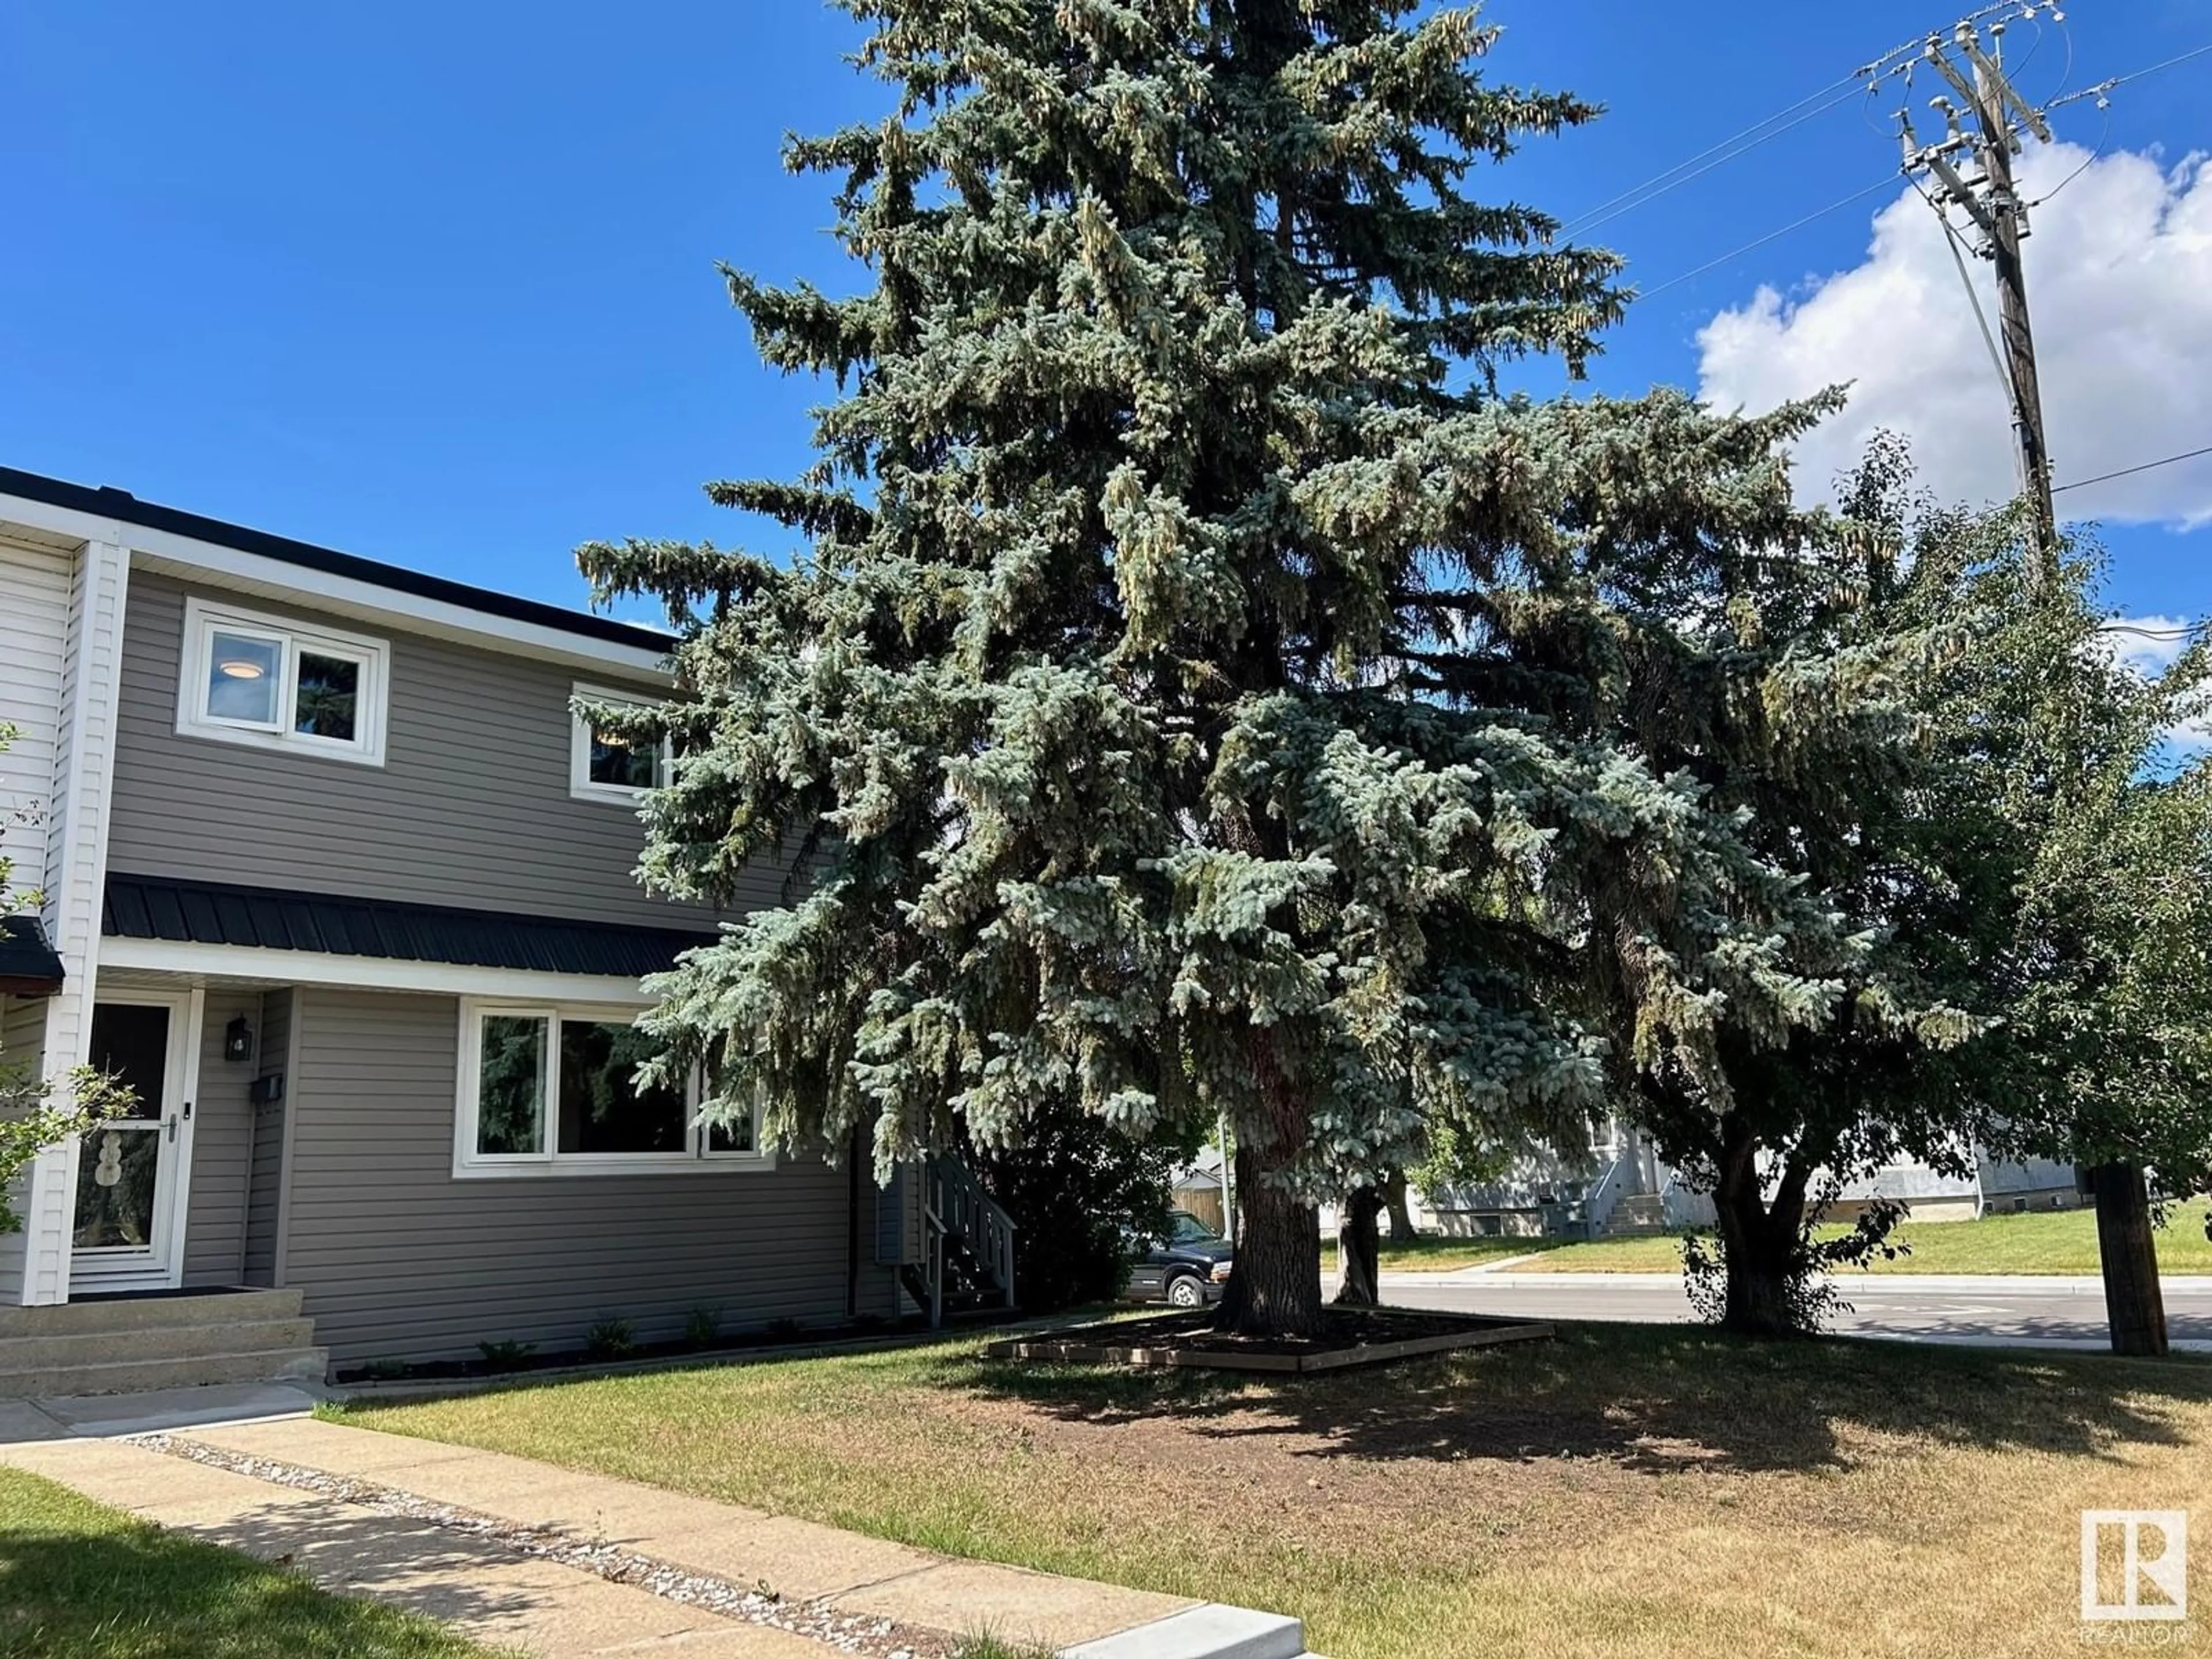 A pic from exterior of the house or condo for 12730 90 ST NW, Edmonton Alberta T5E3L6